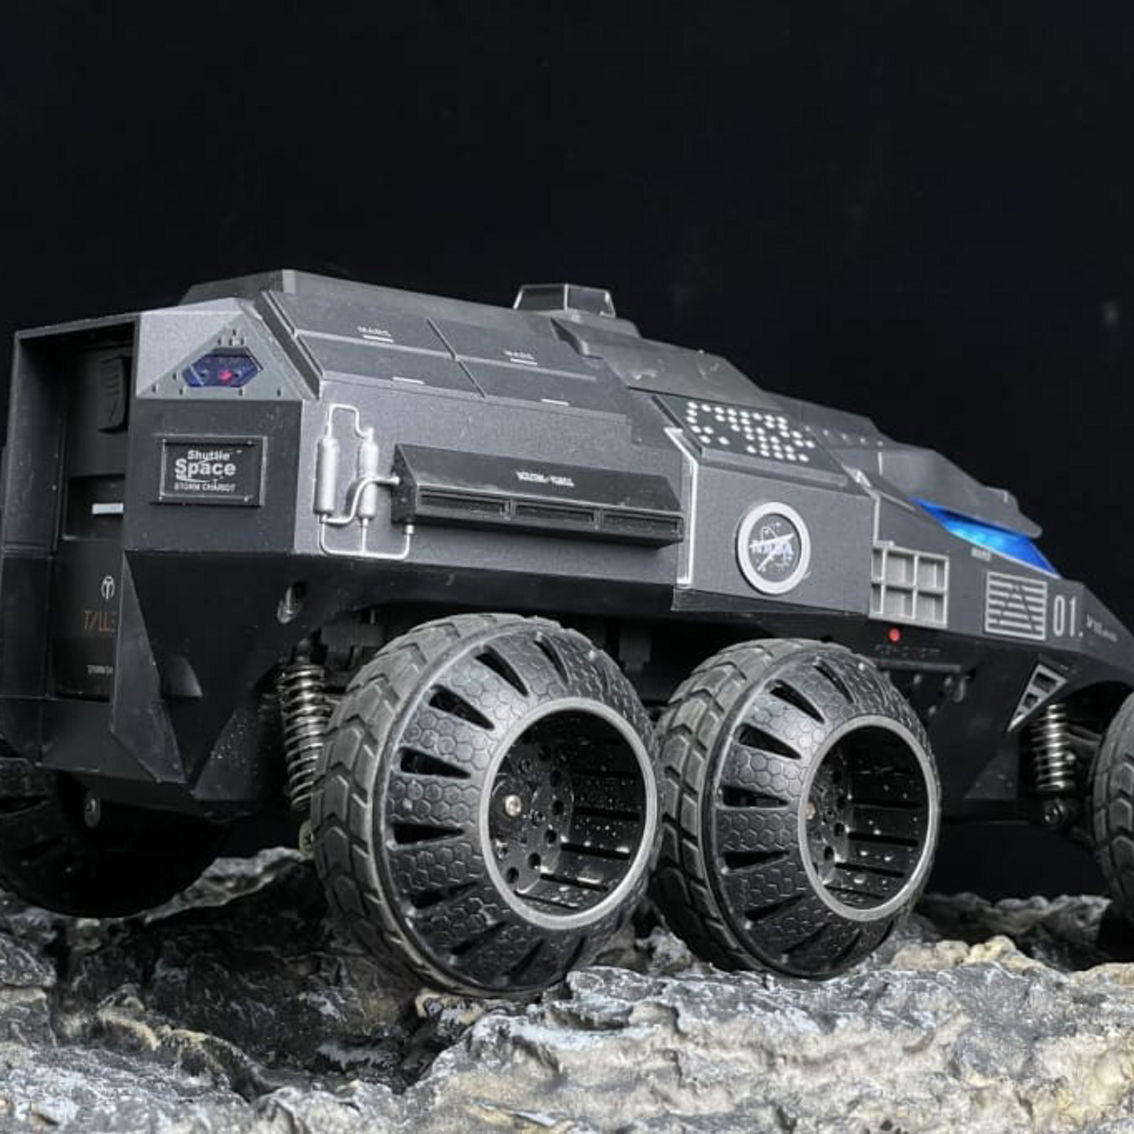 CIS-2065-G Mars rover 6WD truck with lights and shooting gun - Image 4 of 5